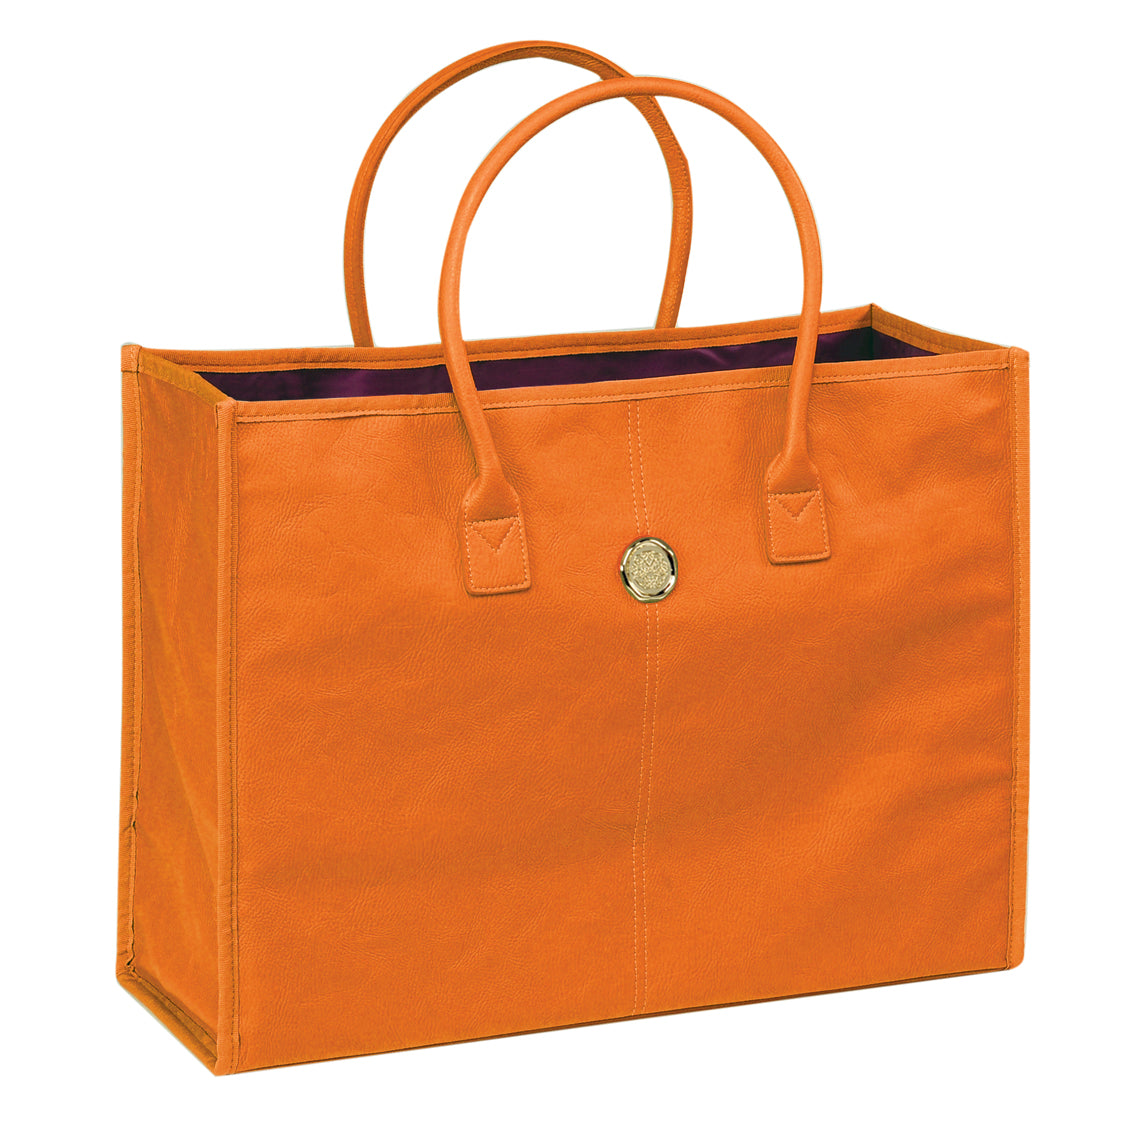 an orange shopping bag with handles and handles.